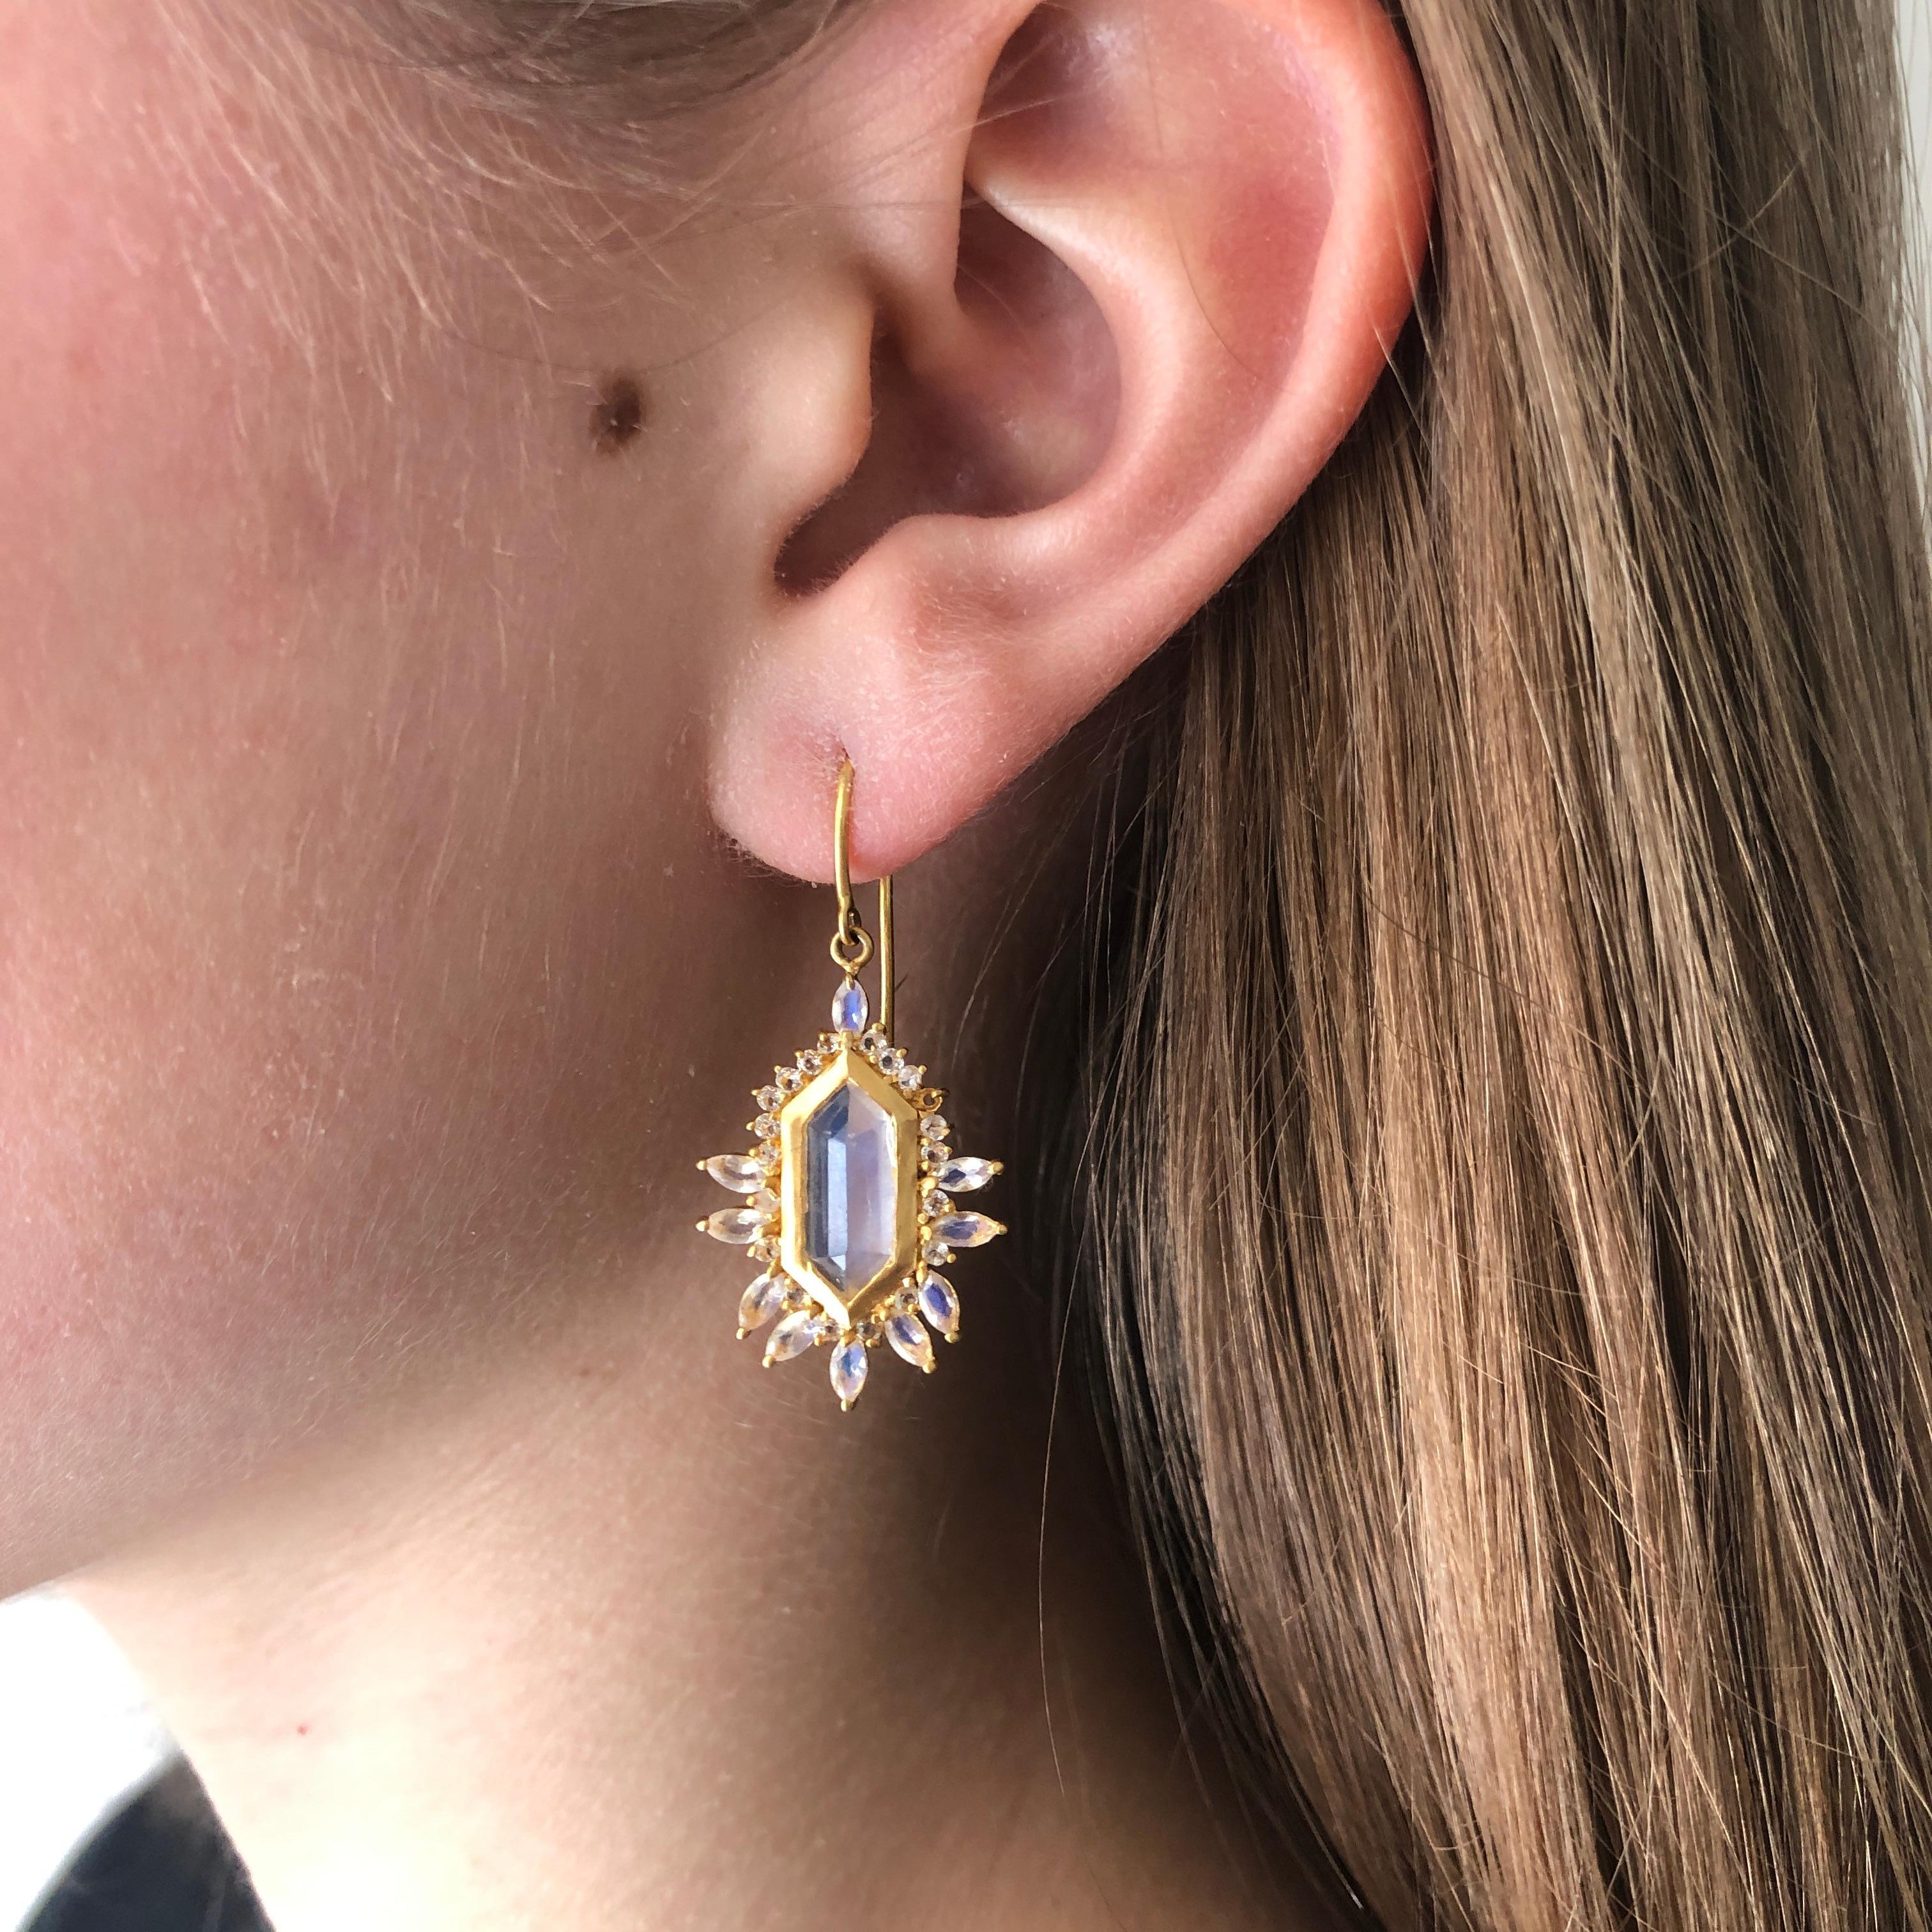 These 18kt Gold earrings glow with stunning faceted Rainbow Moonstones. Designed by award winning jewelry designer, Lauren Harper, these Rainbow Moonstones are luminescent with a bright moonstone flash.  These one of a kind works of art are hand